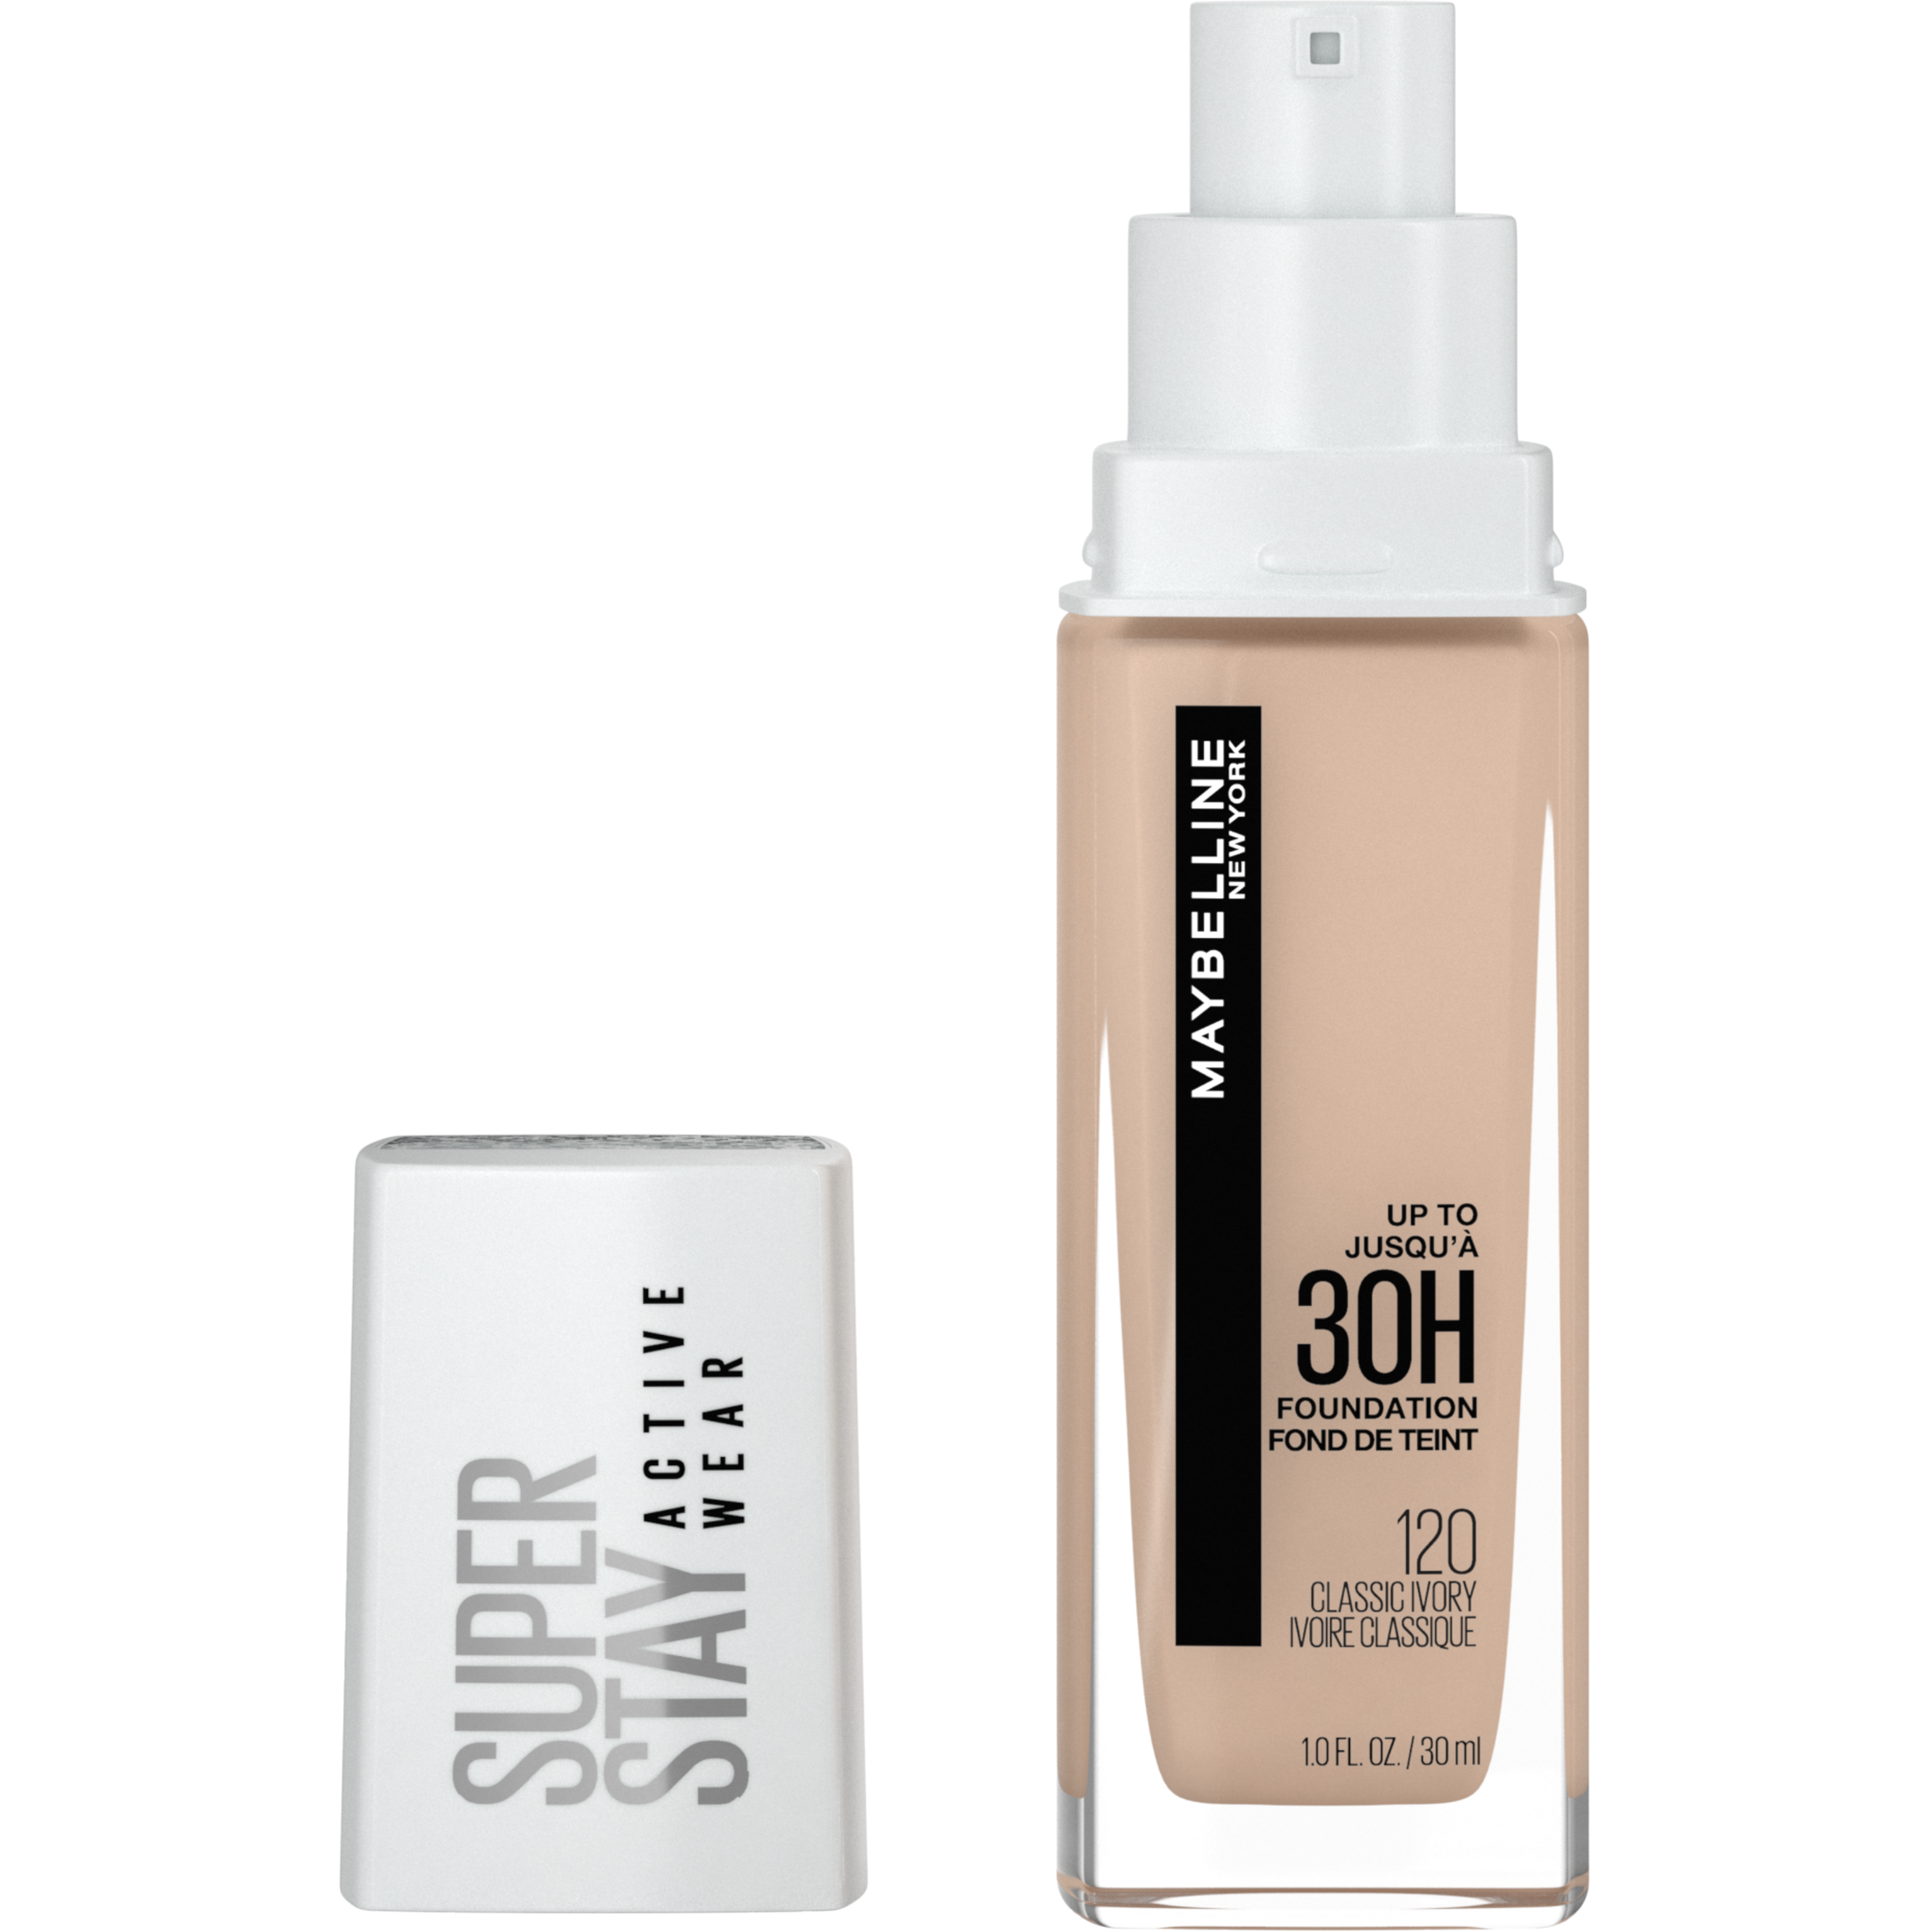 Maybelline Super Stay Liquid Foundation Makeup, Full Coverage, 120 Classic Ivory, 1 fl oz - image 1 of 8